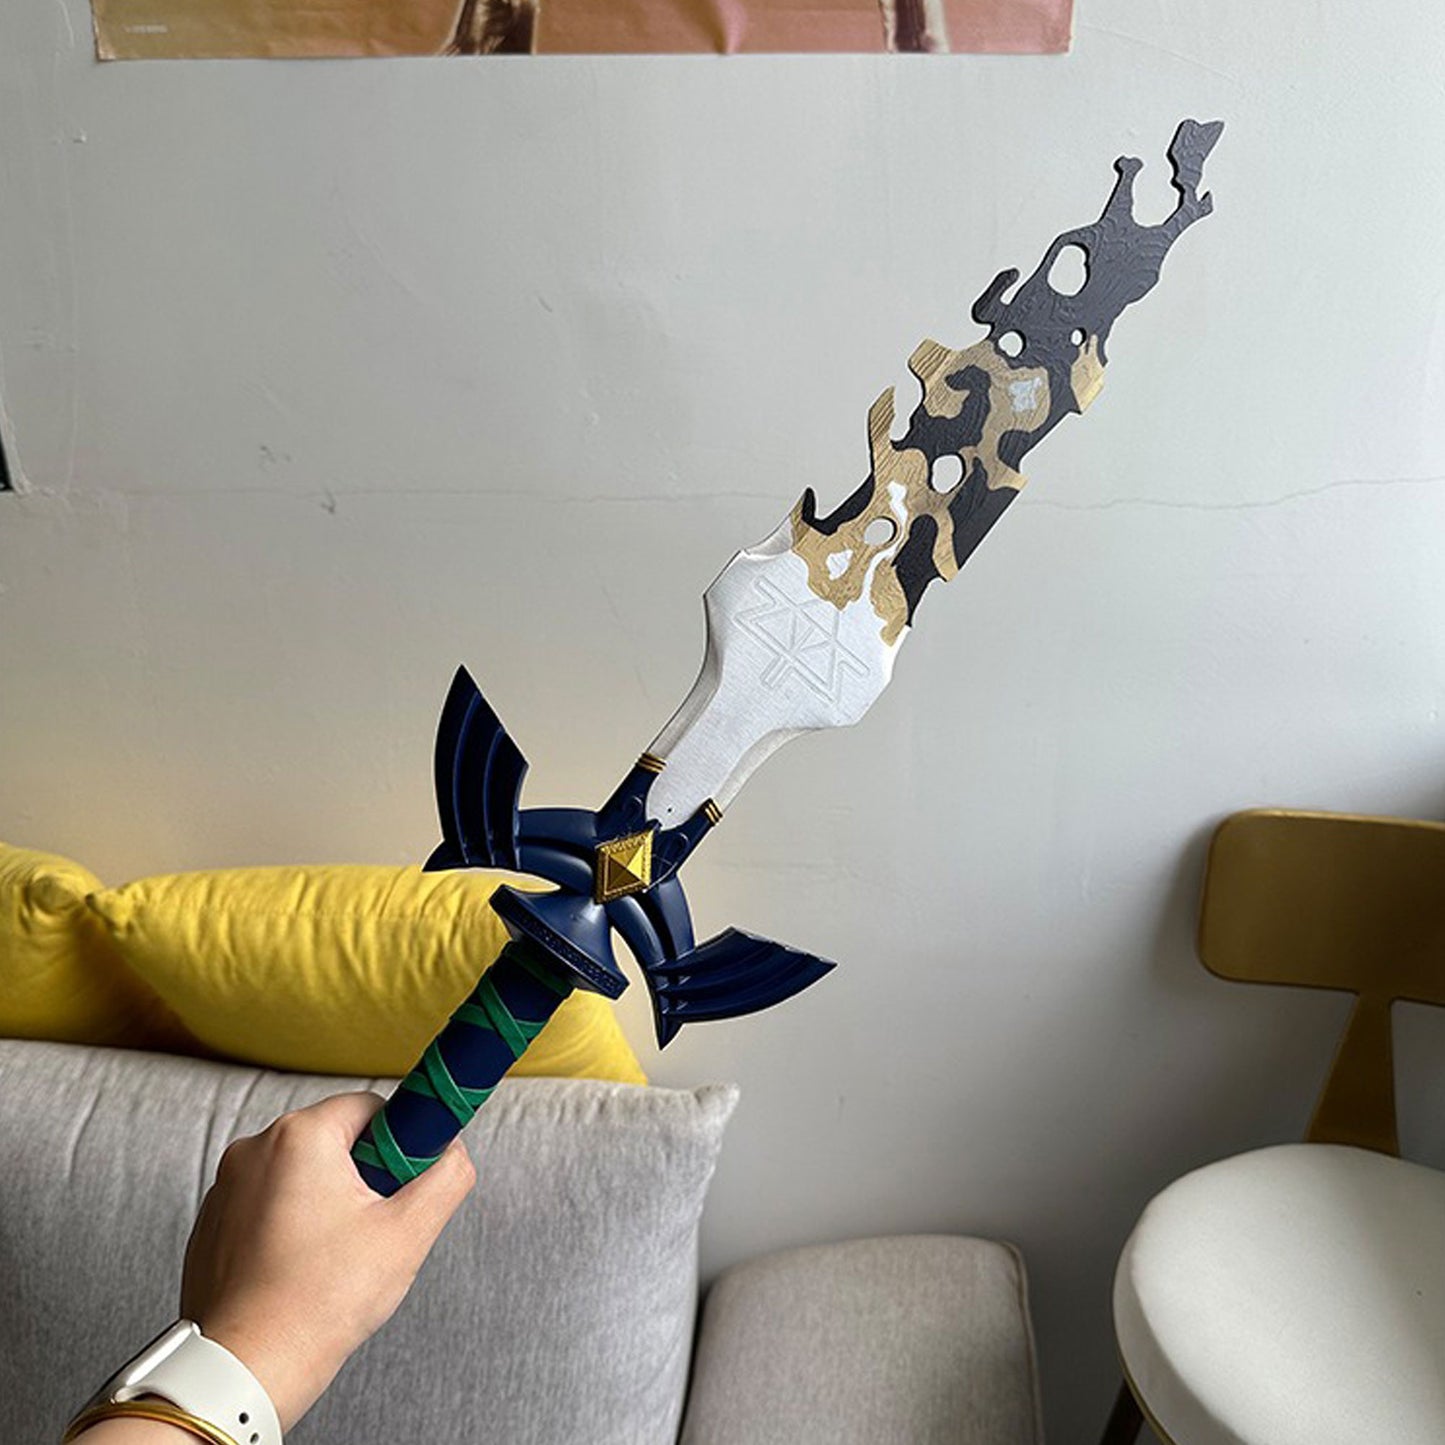 Decayed Master Sword White Blade Link Cosplay Prop 62CM/24"